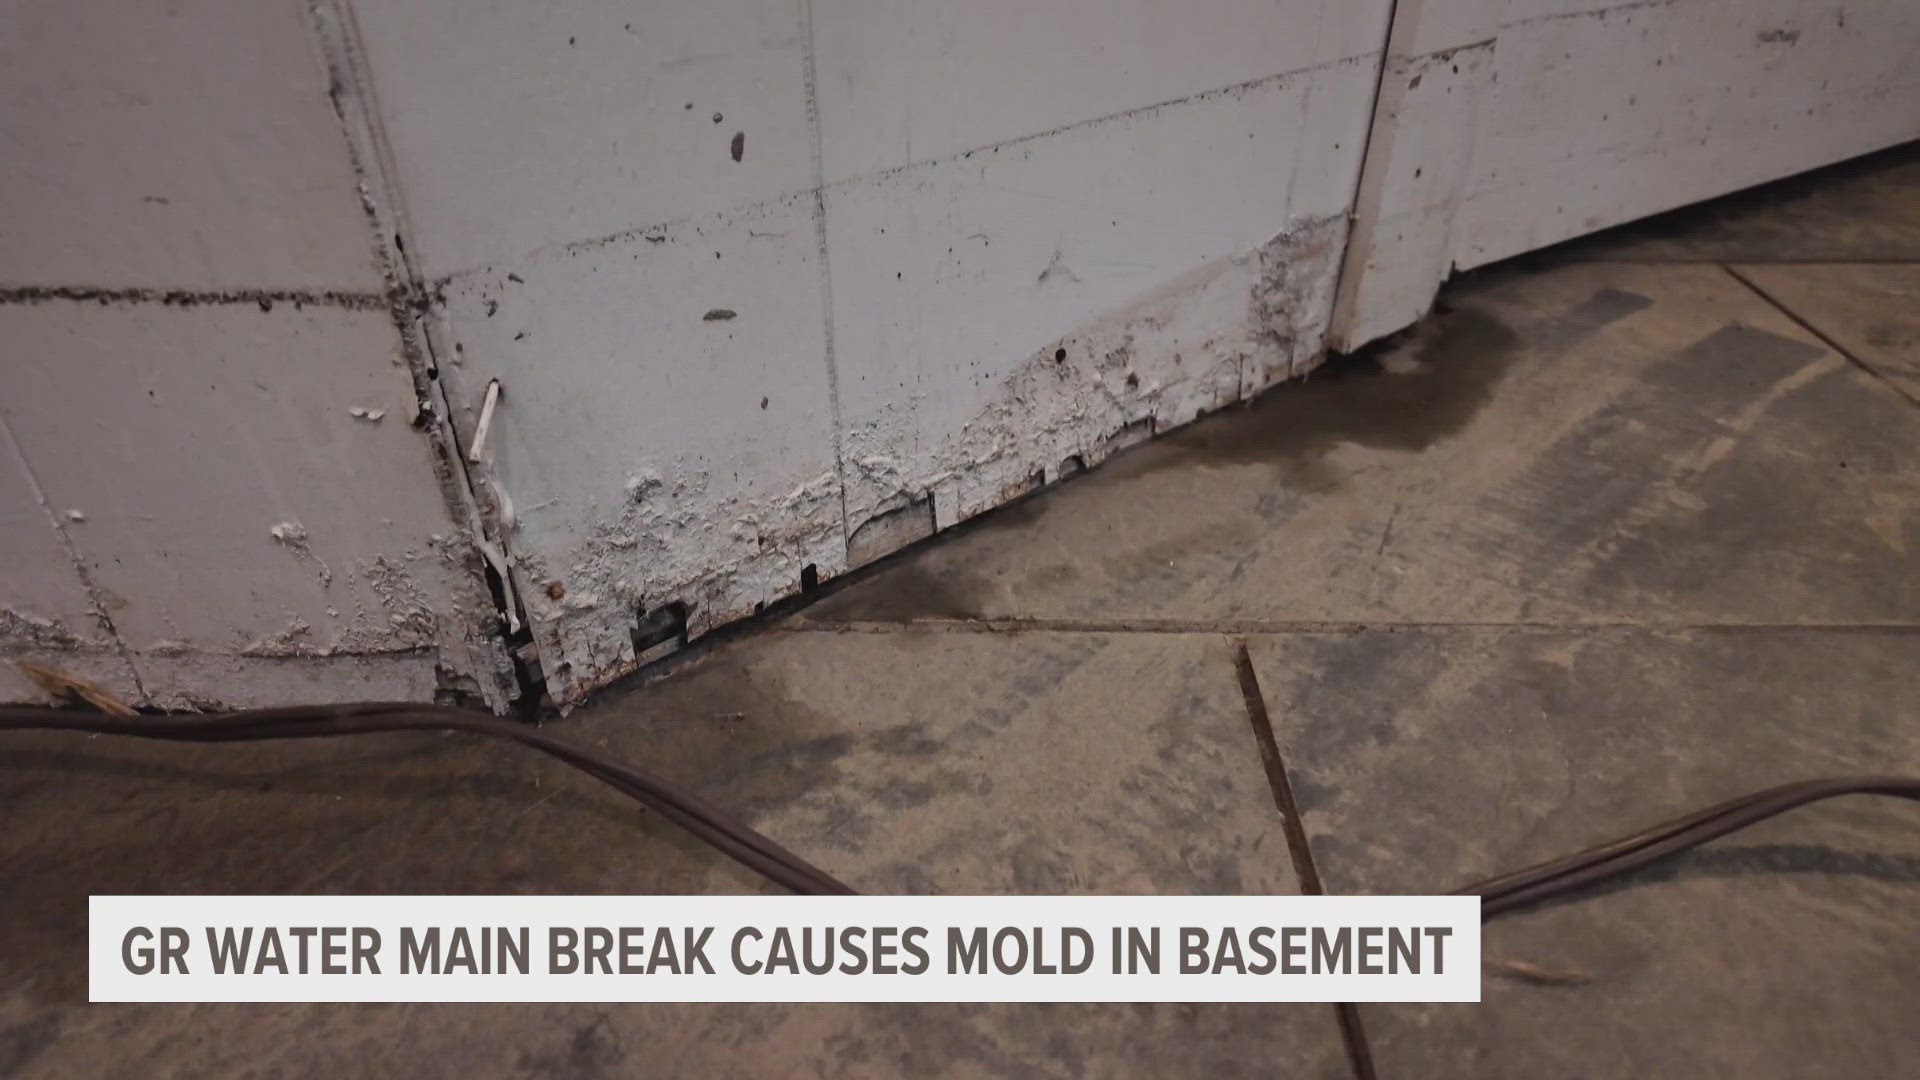 Two weeks after a water main break in Southeast Grand Rapids impacted over 200 homes, one resident is still experiencing the aftermath of the damage.